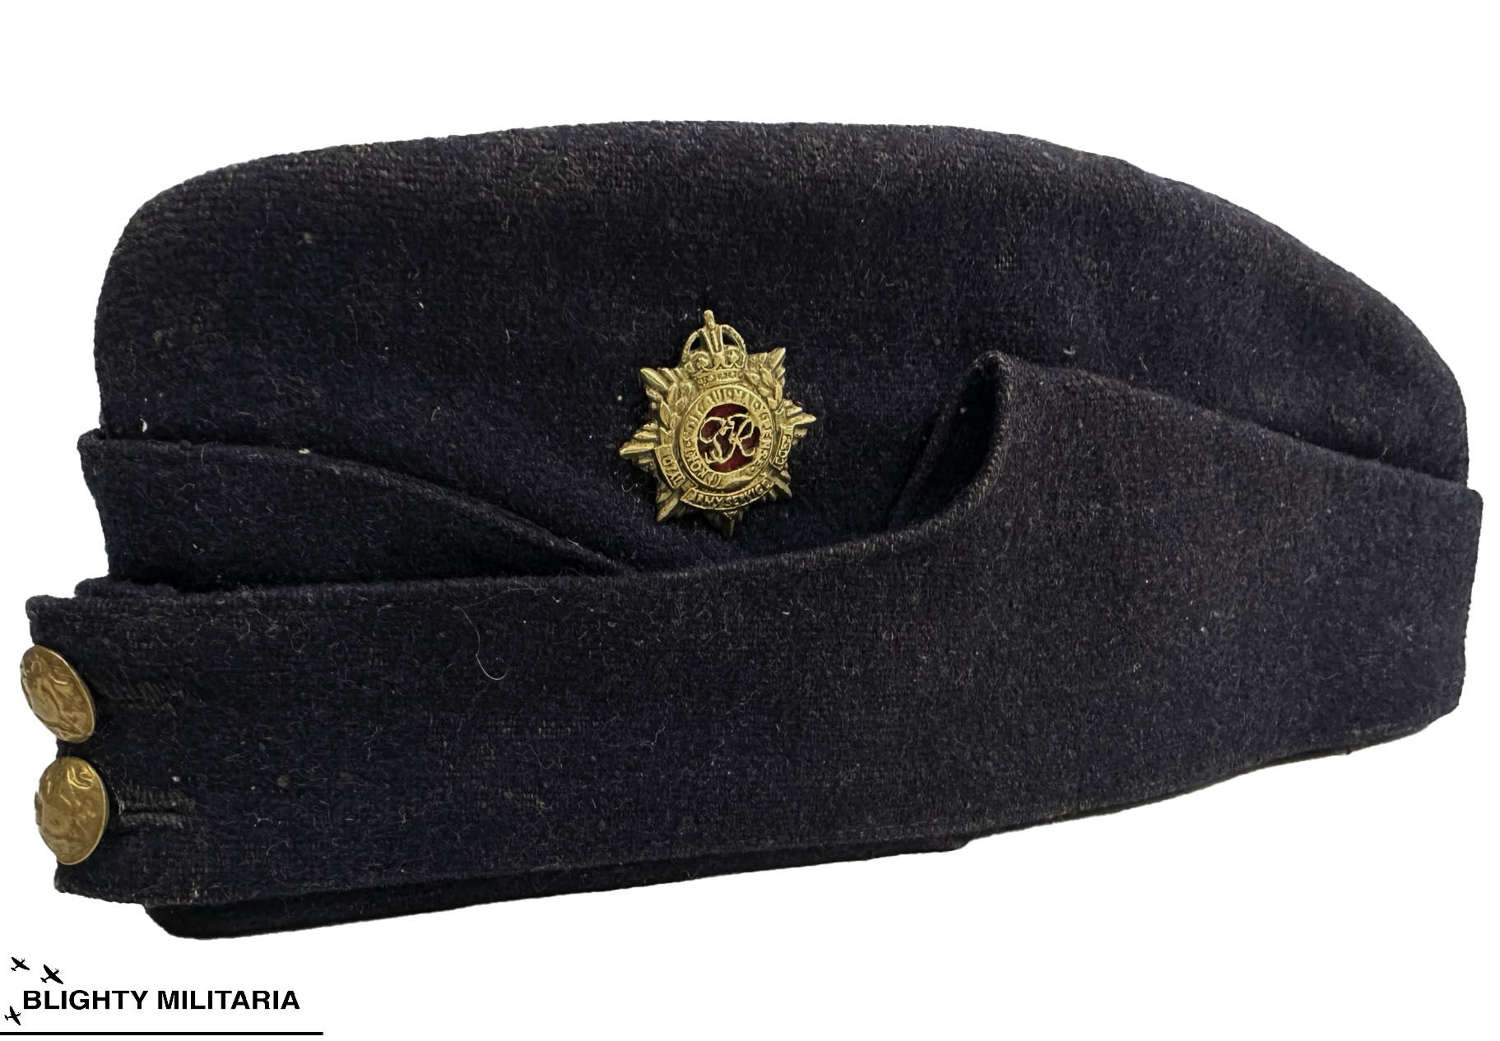 Original WW2 Royal Army Service Corps Officer's Field Service Cap